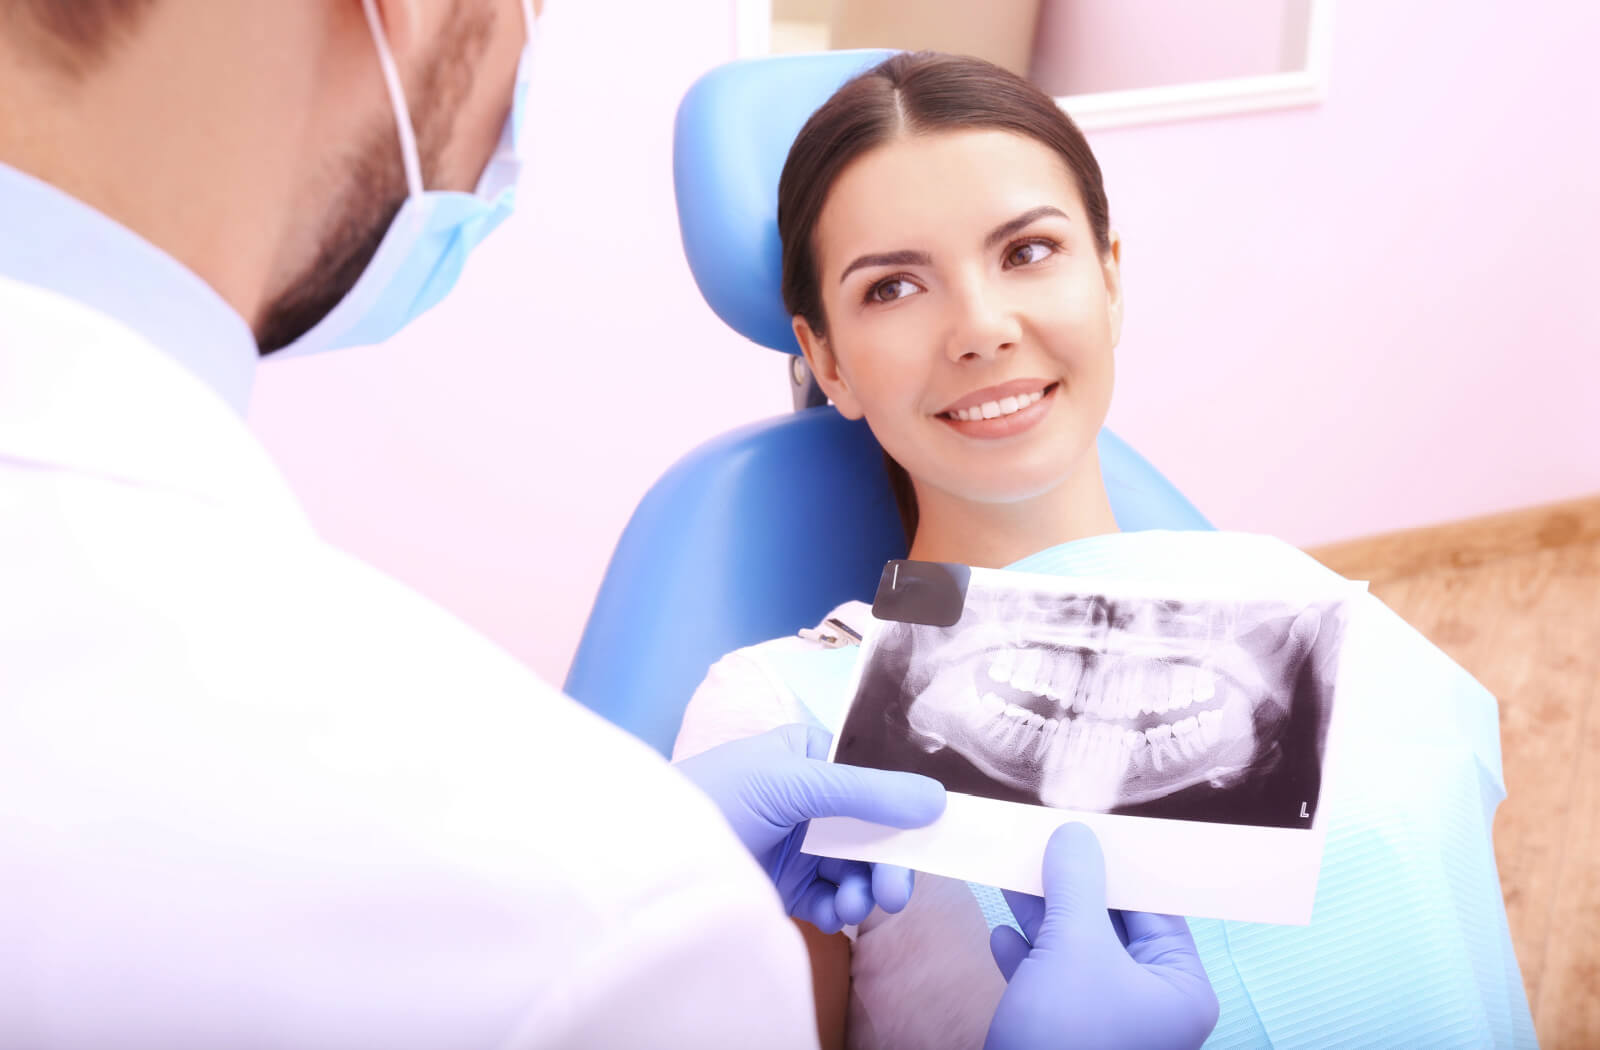 A male dentist explaining a dental implant procedure to a woman while holding a dental x-ray image.